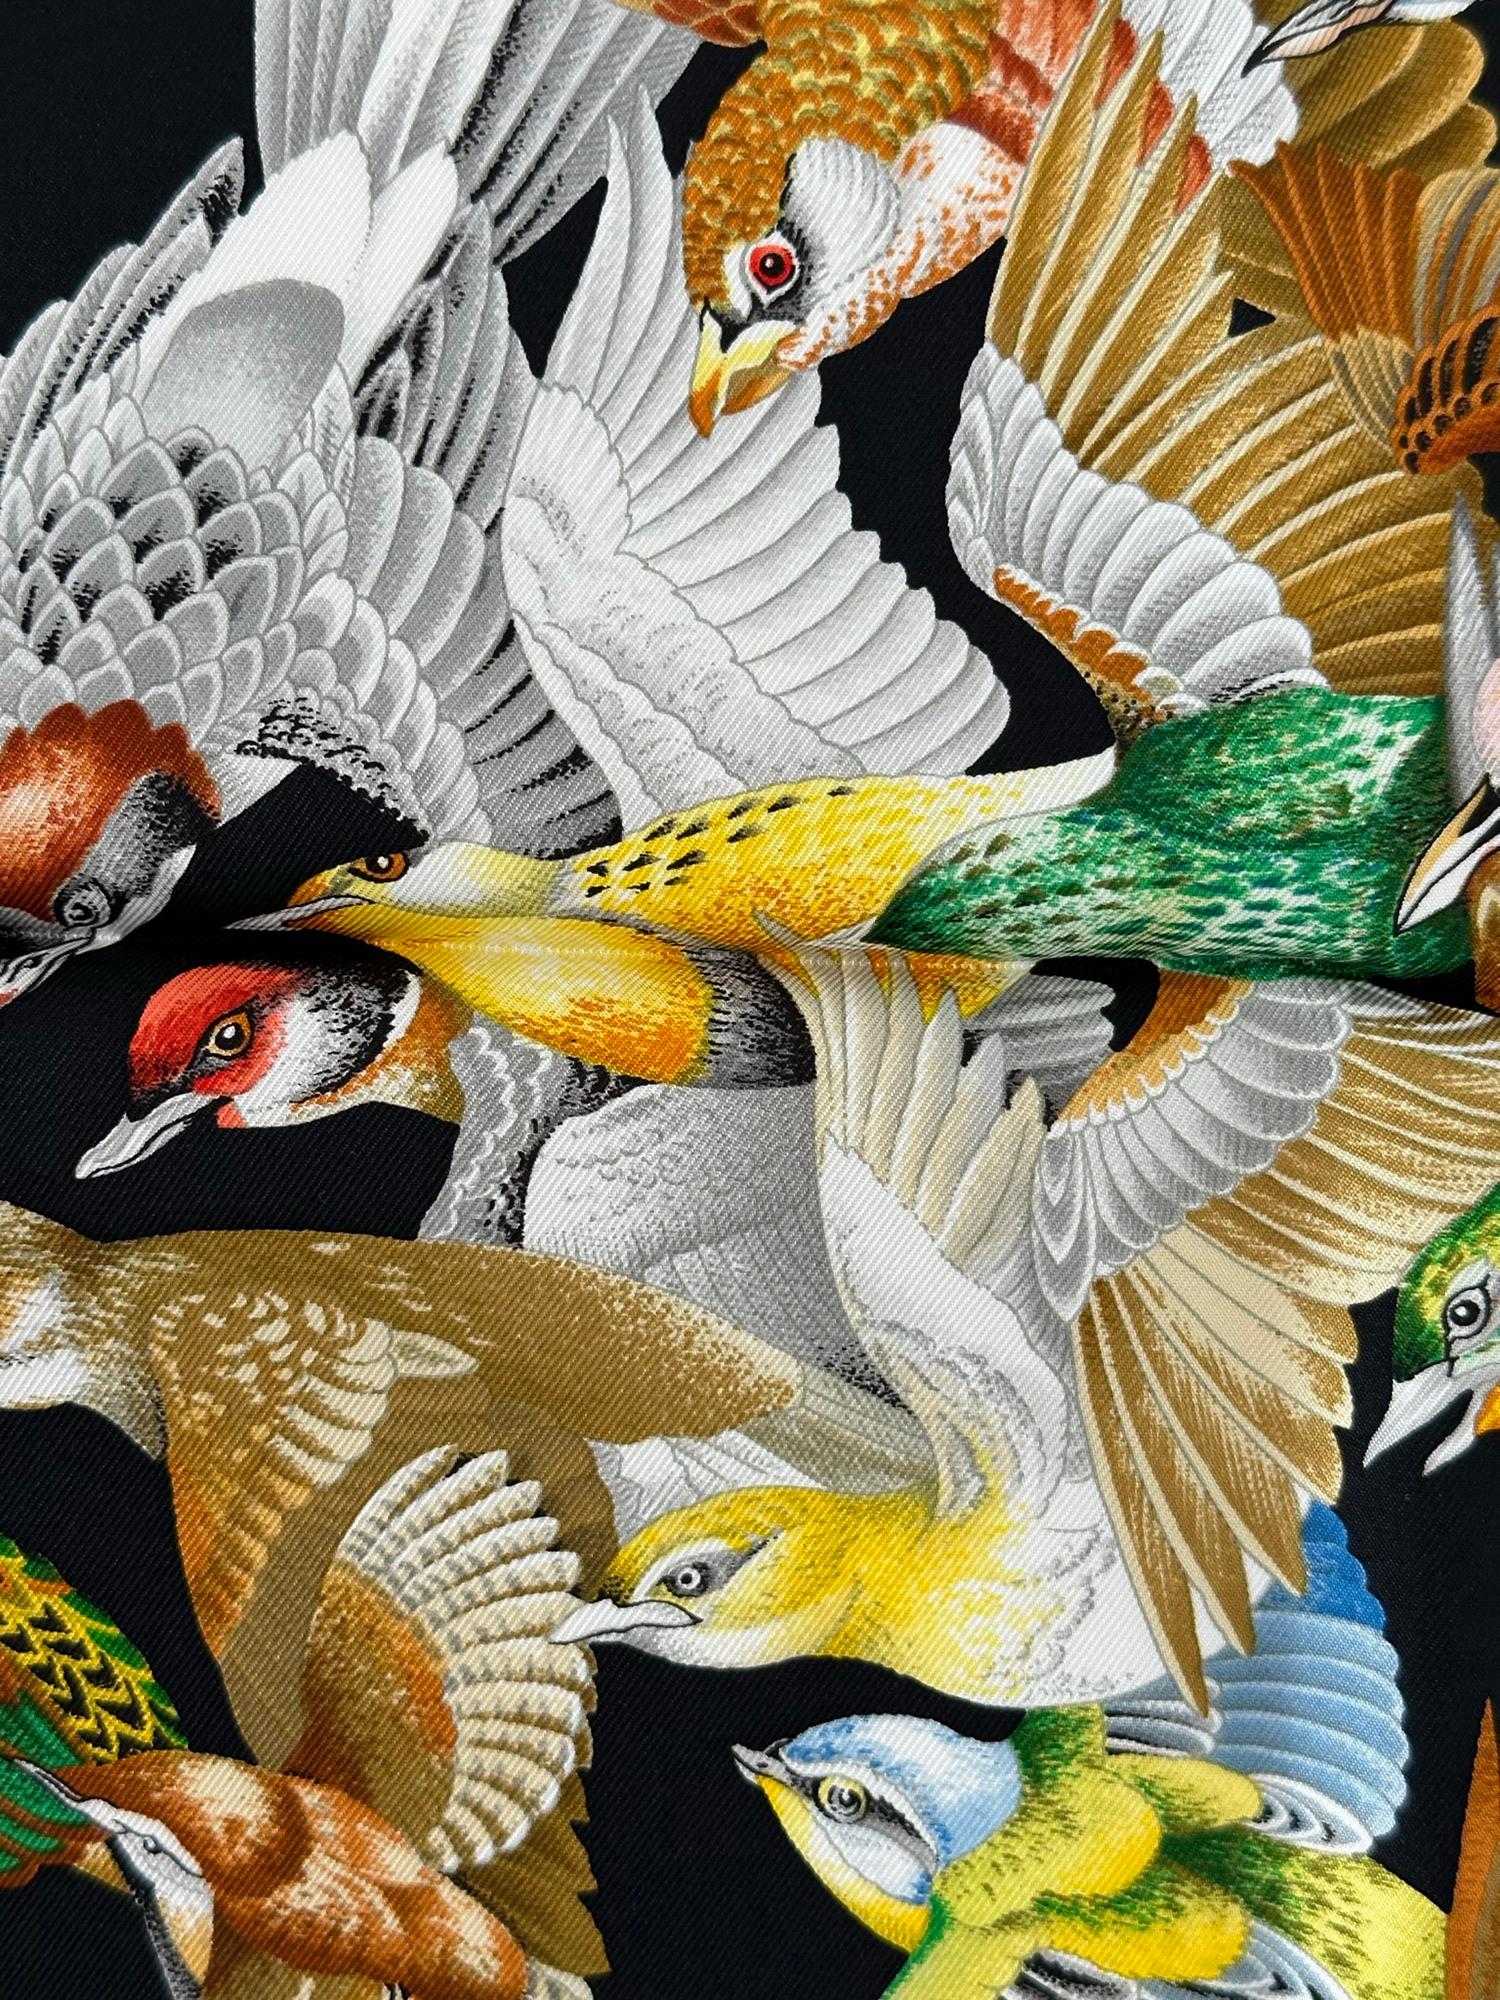  Hermès l’Intrus by Antoine de Jacquelot, silk twill scarf on a black ground with flocks of amazingly illustrated birds. First issued in 1996, this striking scarf showcases various varieties of birds. Centered is, 'the intruder' the noble falcon.